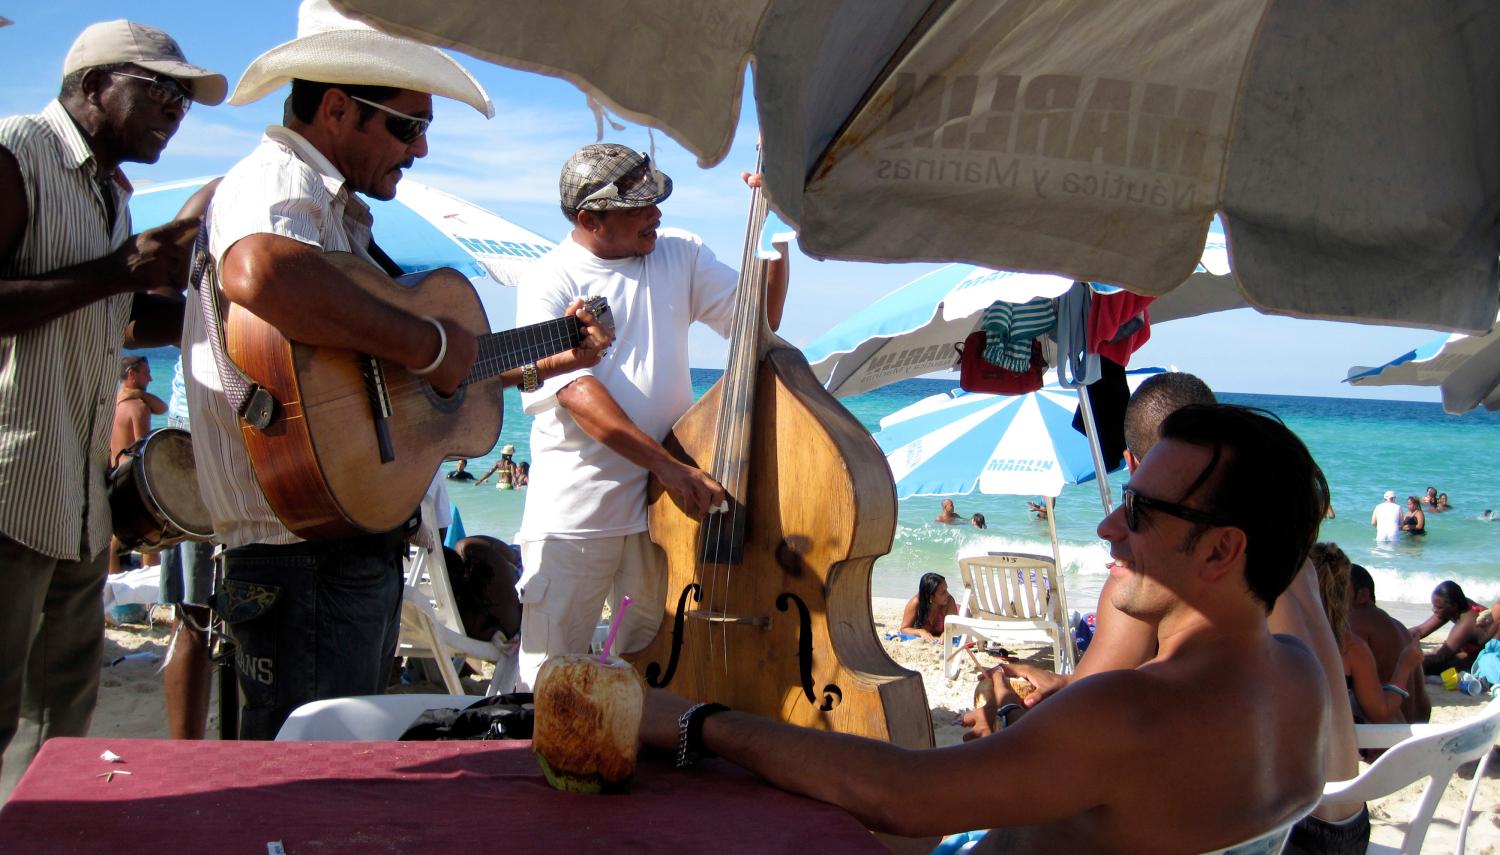 Tourists listen to a live band as they enjoy a day on the beach on the outskirts of Havana September 30, 2012. Cuba's beaches are an attraction for tourists the world over, whether they are foreigners paying thousands of dollars to reach them, or Cubans paying as little as five dollars for a three-day vacation in a seaside cabin. REUTERS/Desmond Boylan (CUBA - Tags: SOCIETY TRAVEL) - RTR38N3S